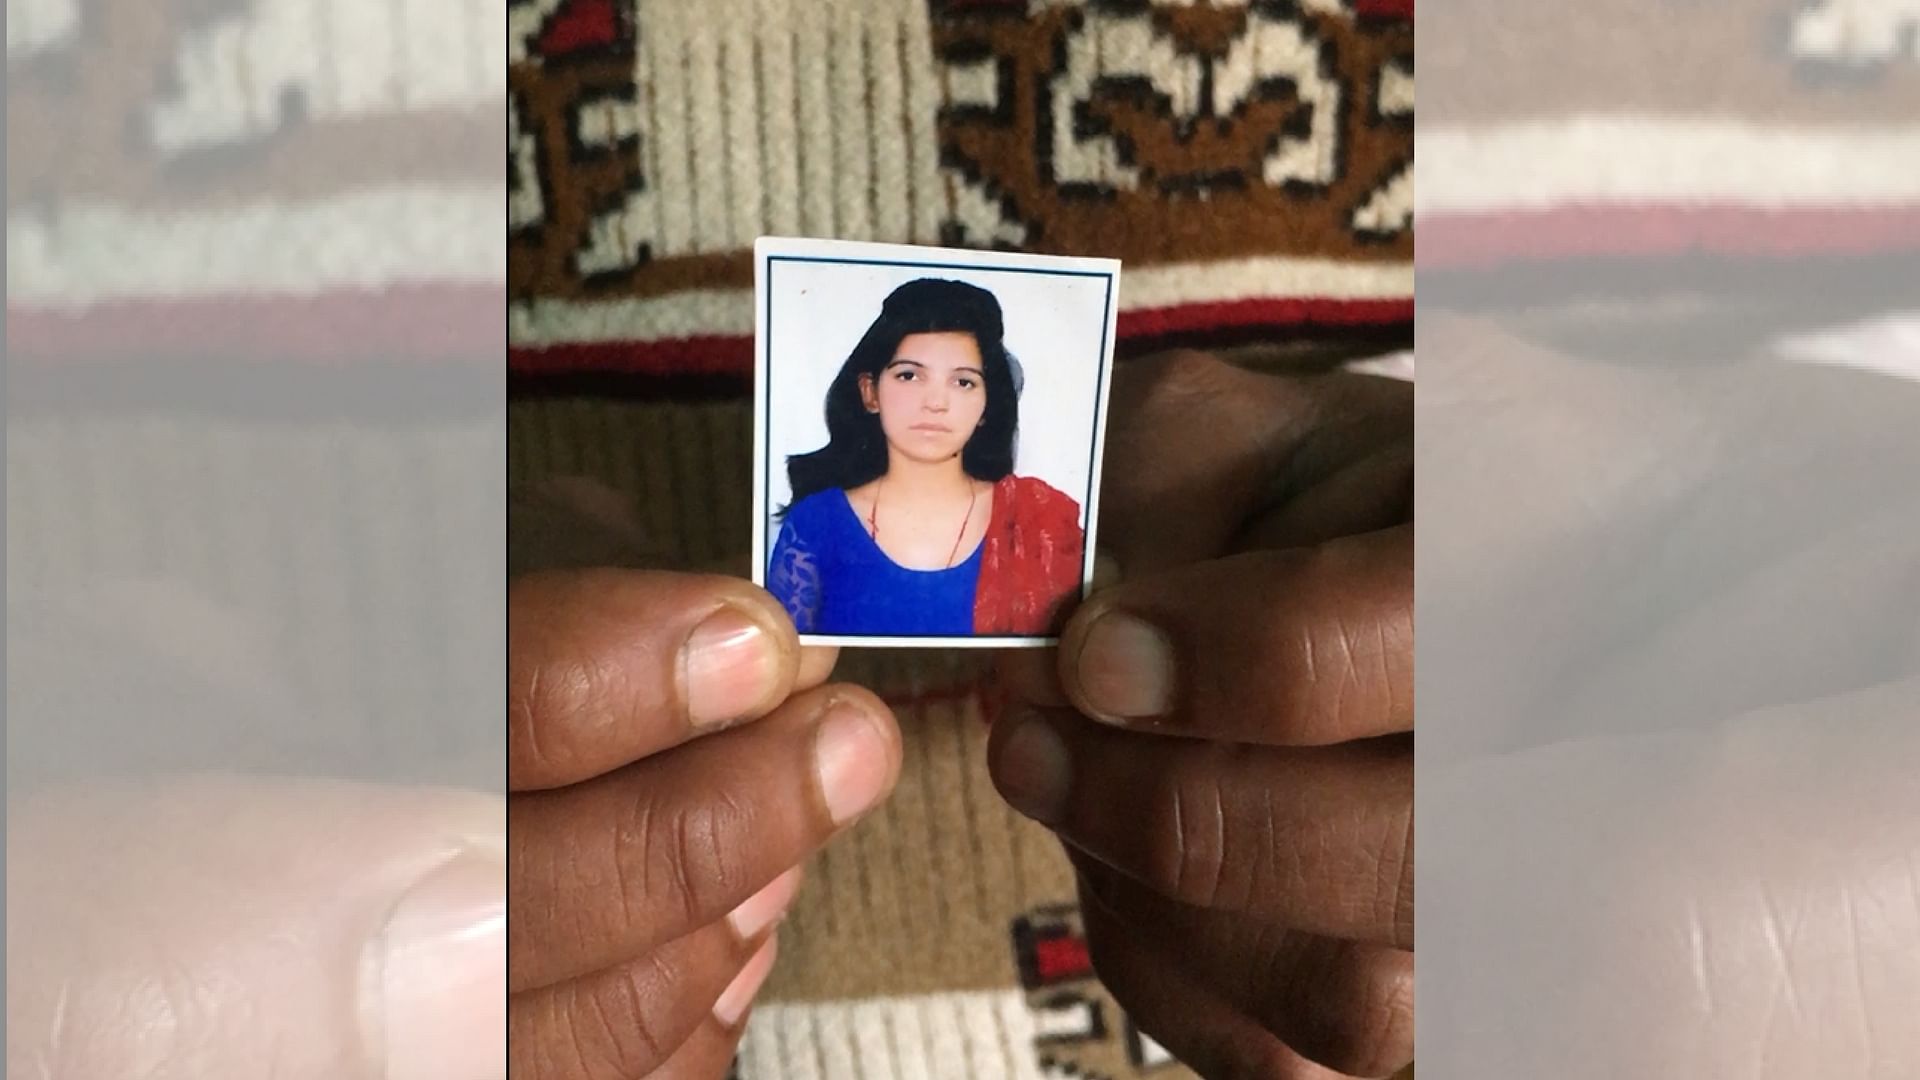 Twenty-two-year-old Priyanka was hacked to death on Valentine’s Day, 2018, by a man who was allegedly stalking her.